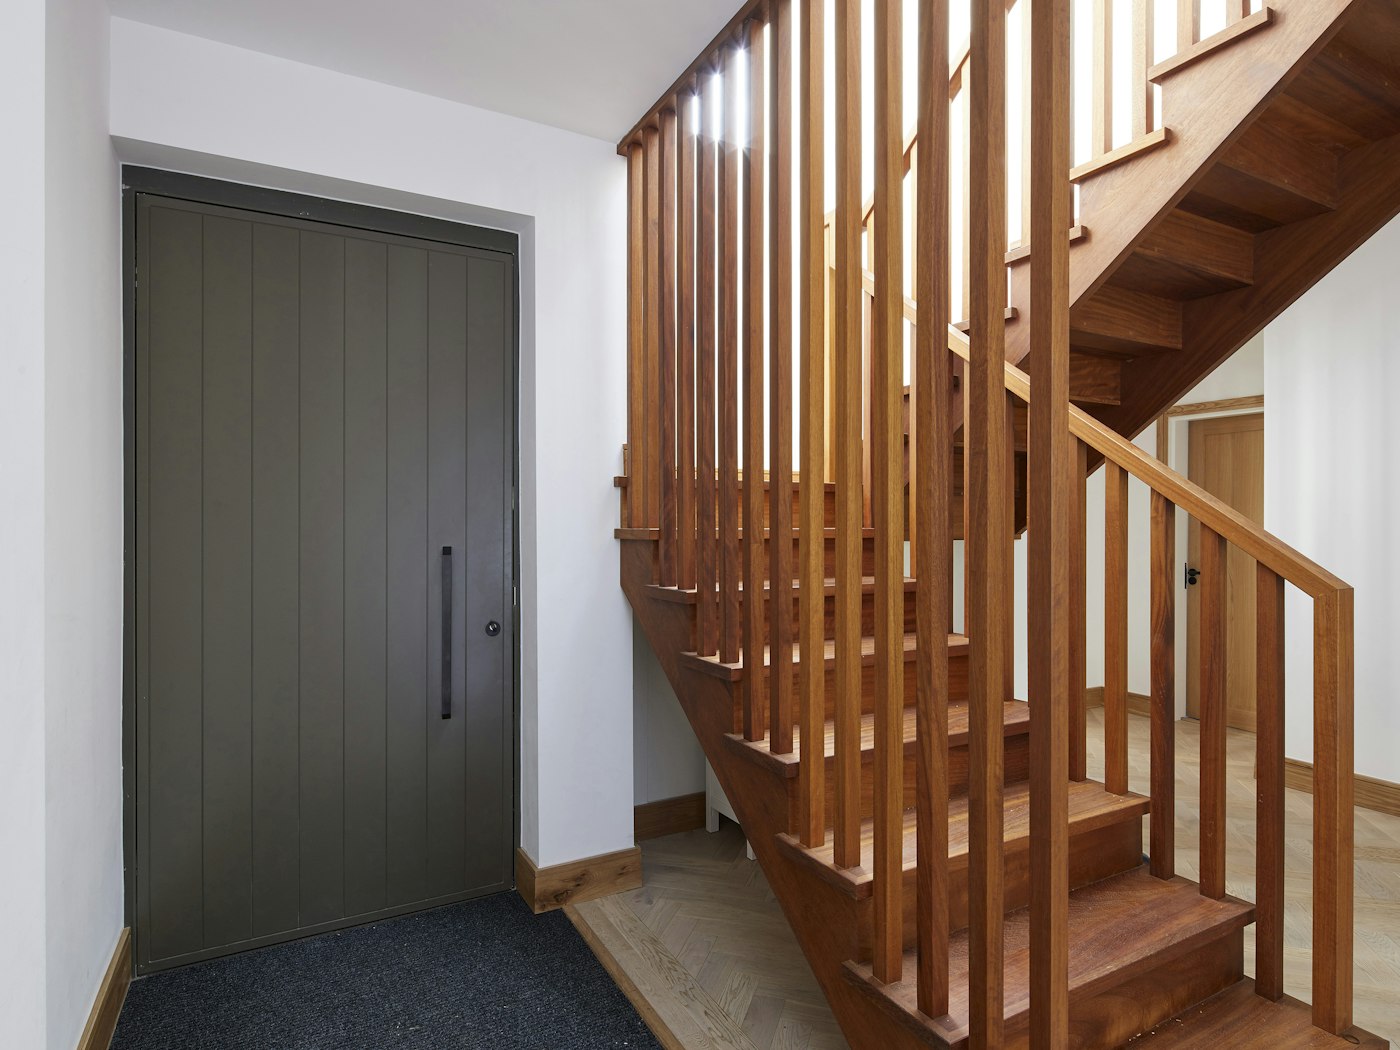 Internally the olive colour perfectly complements the wooden staircase